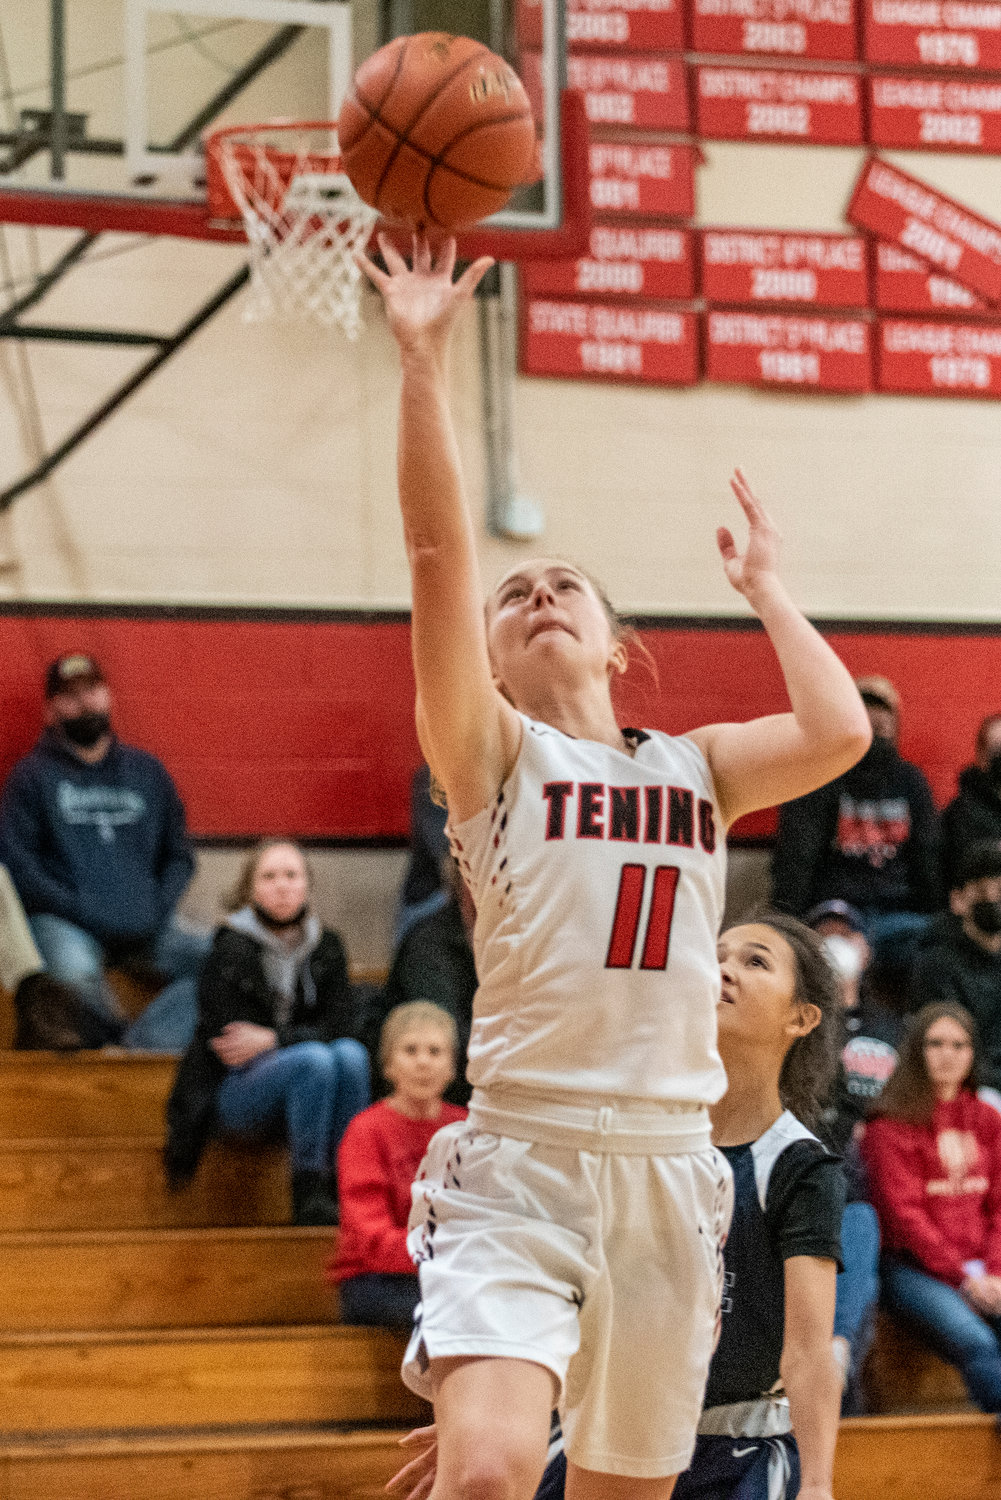 Tenino's Megan Letts (11) gets a wide-open layup against Cascade Christian on Dec. 20.